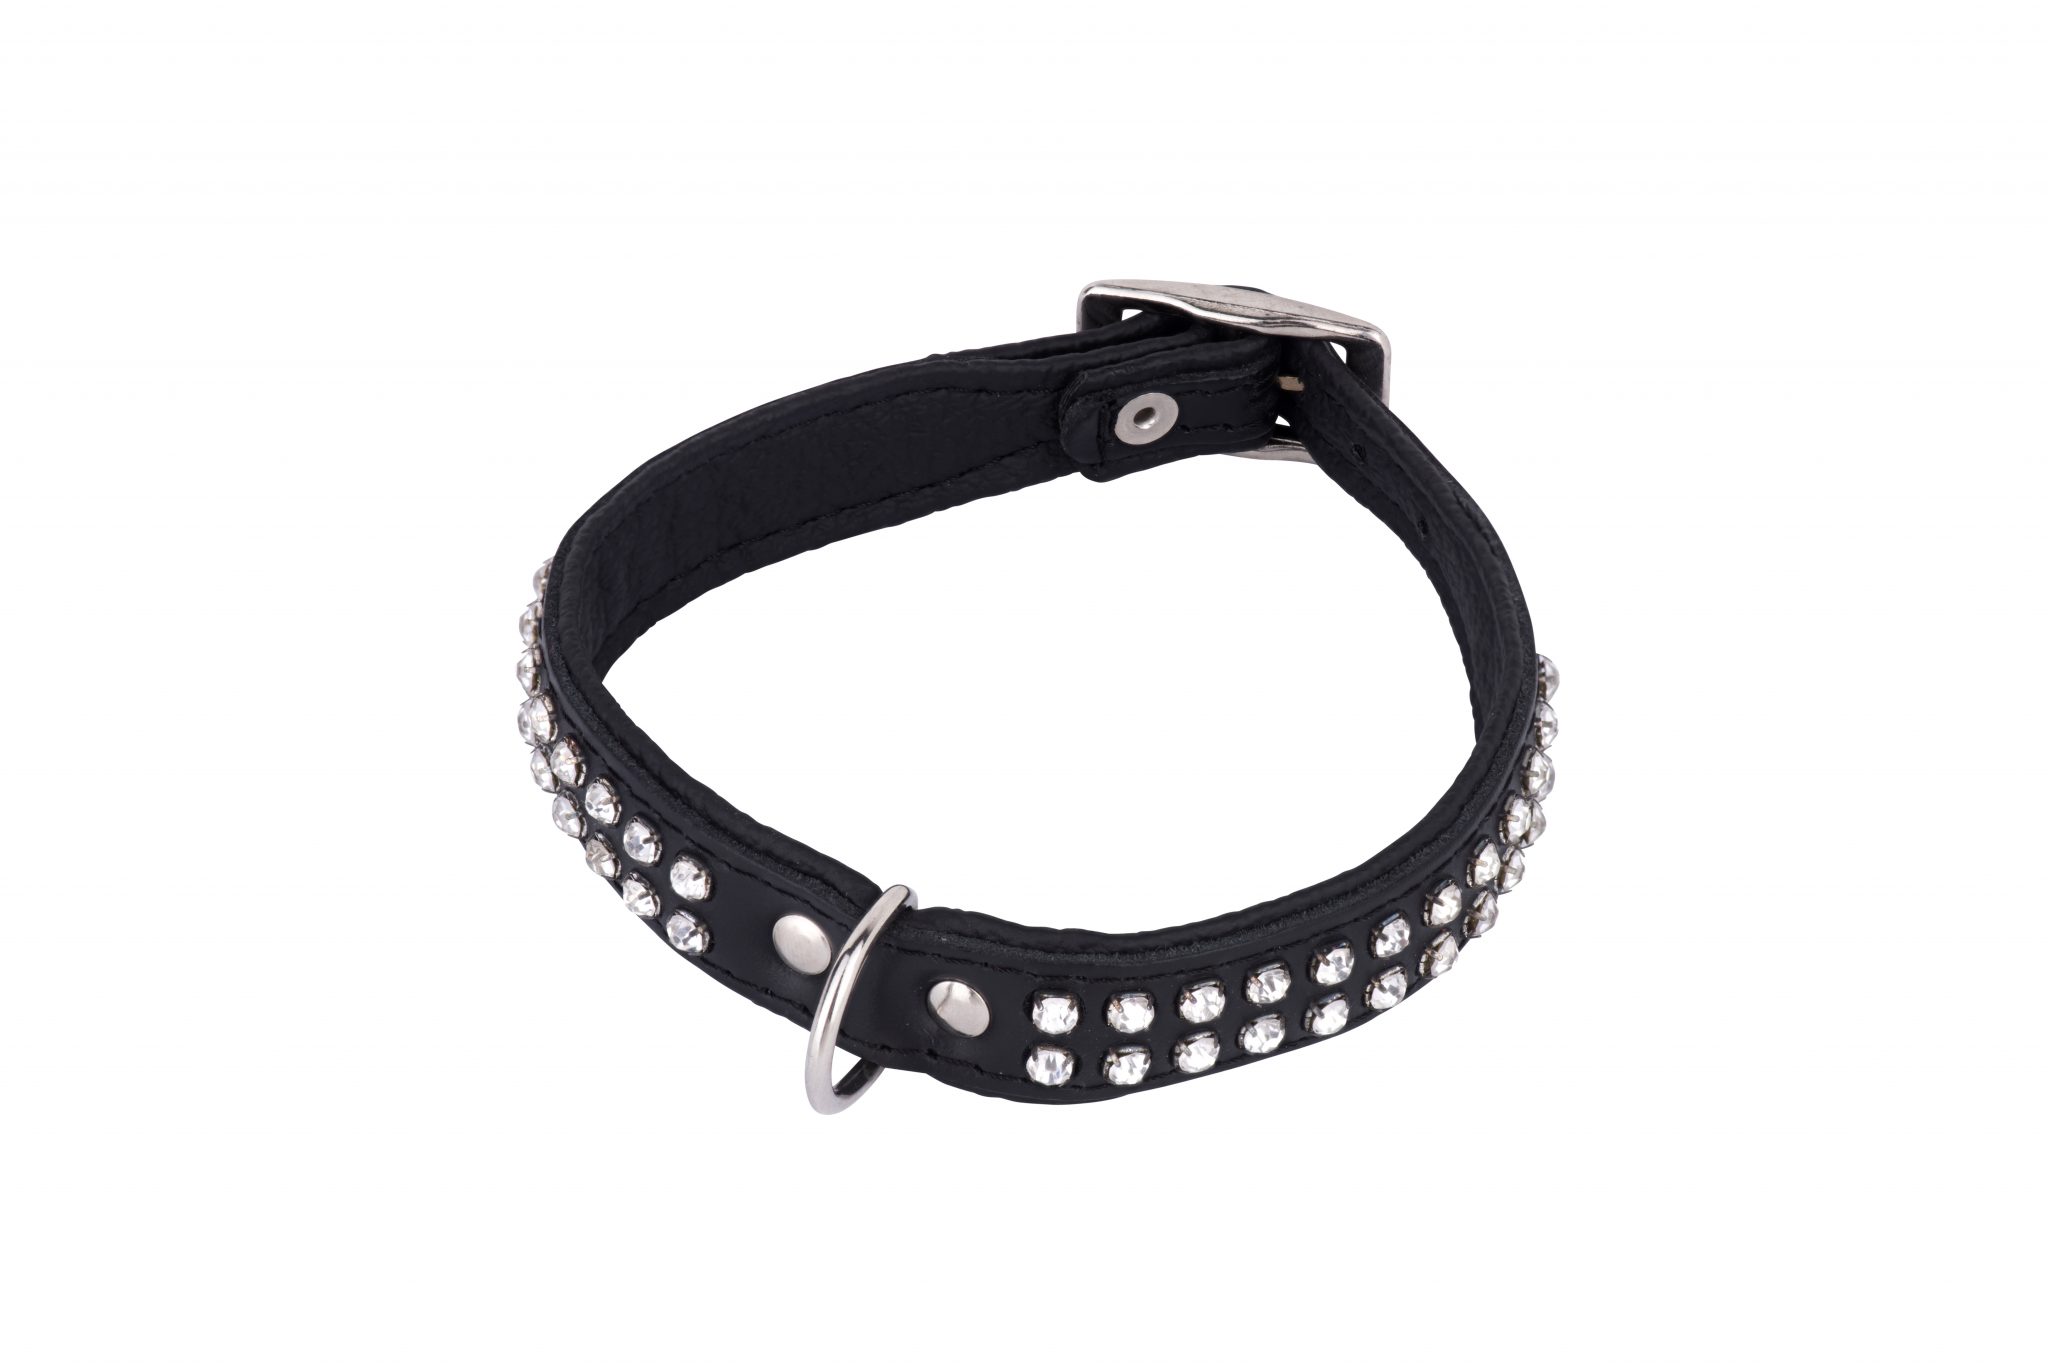 Essex black leather designer dog collar and dog lead by IWOOF